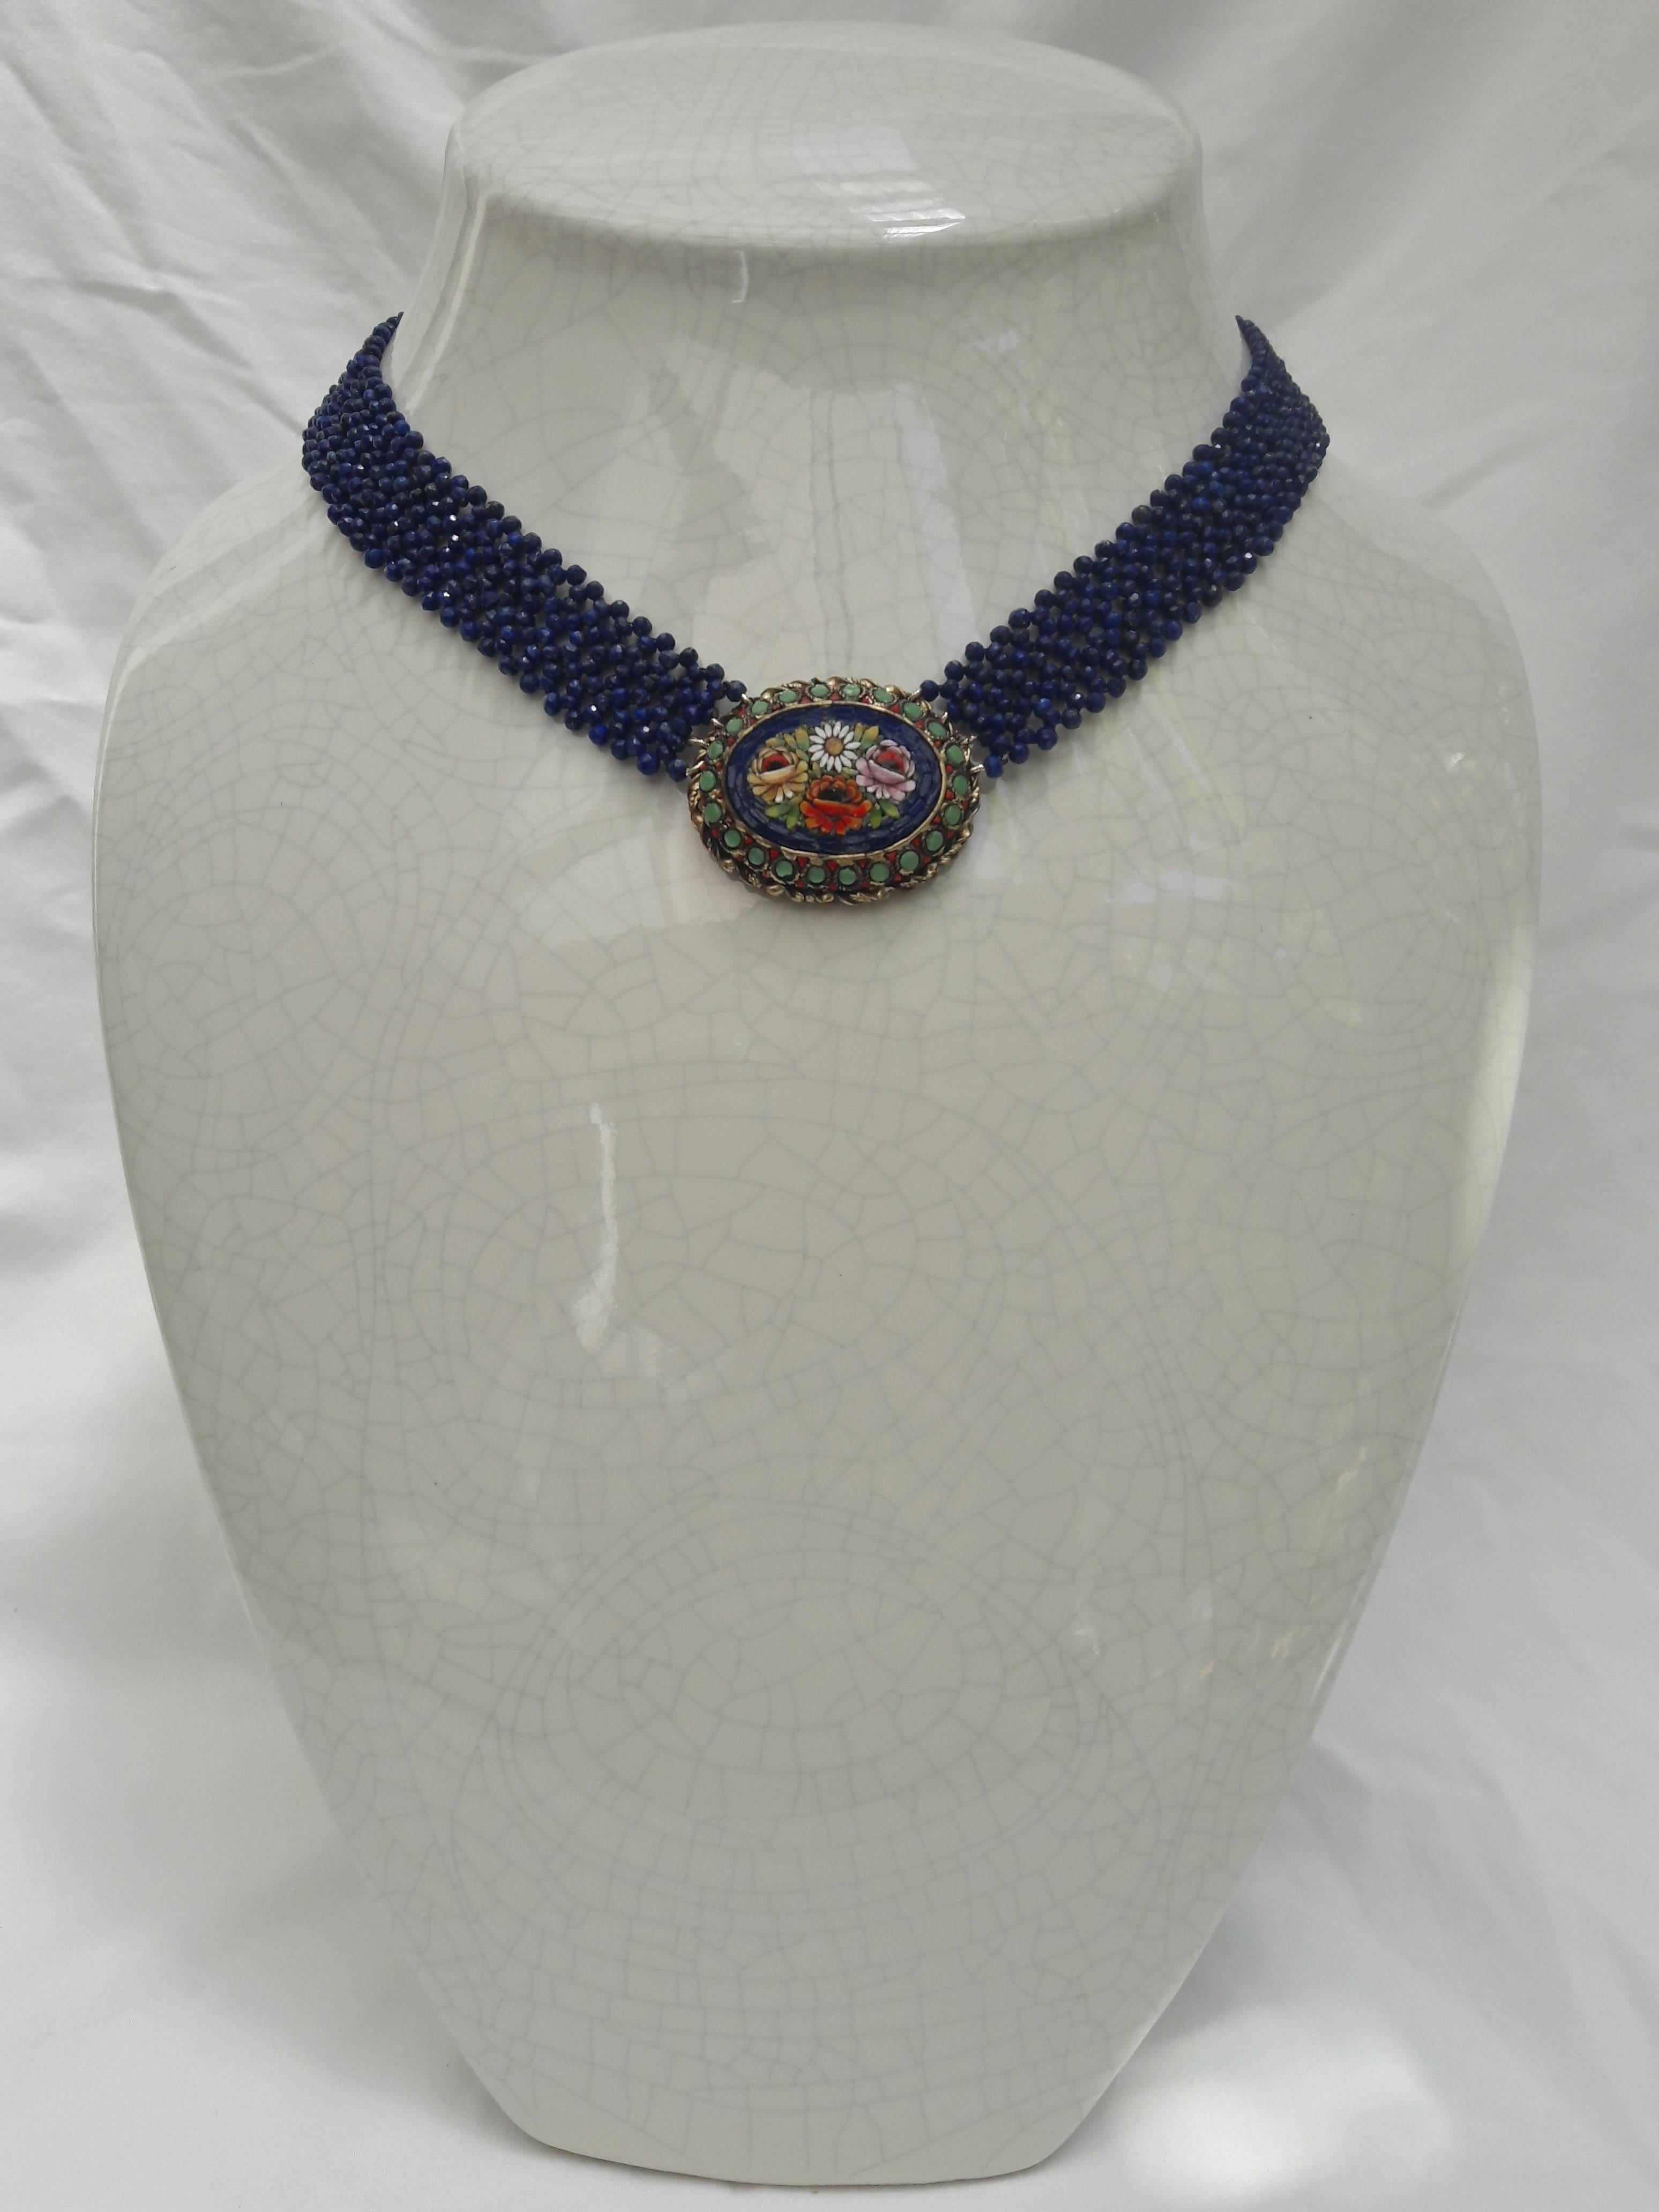 Turn of the century fine and detailed micro mosaic brooch necklace, decorated with a colorful floral still life. The multi-stranded woven lapis-lazuli ribbon looks like it came with the brooch originally. Marina has, very expertly, color matched the